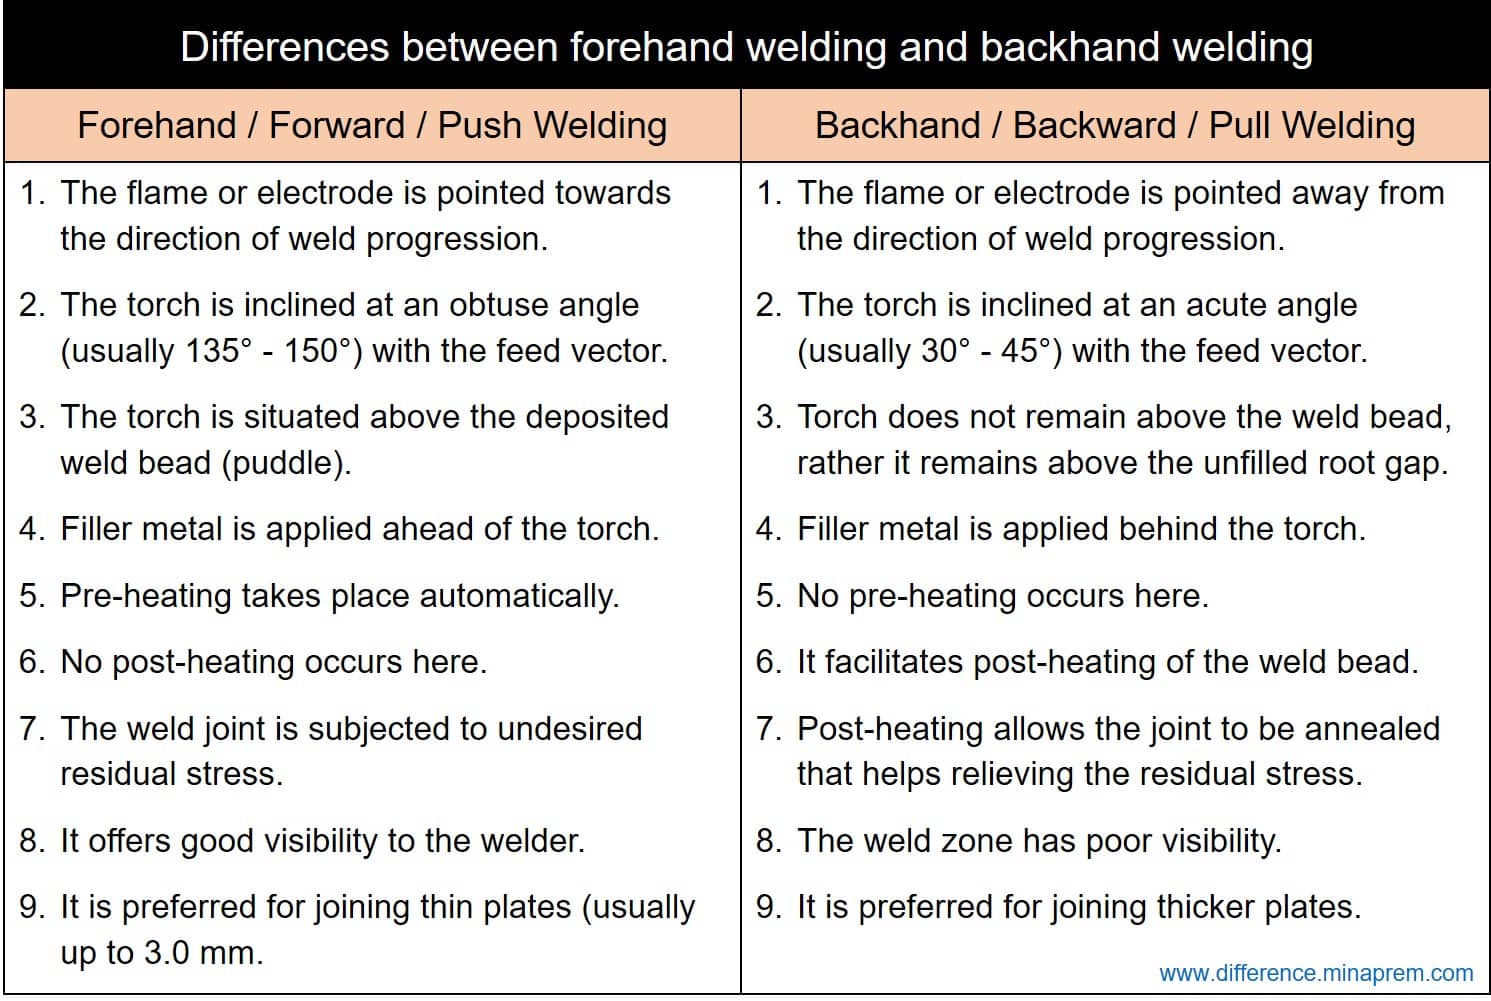 Difference between forehand welding and backhand welding